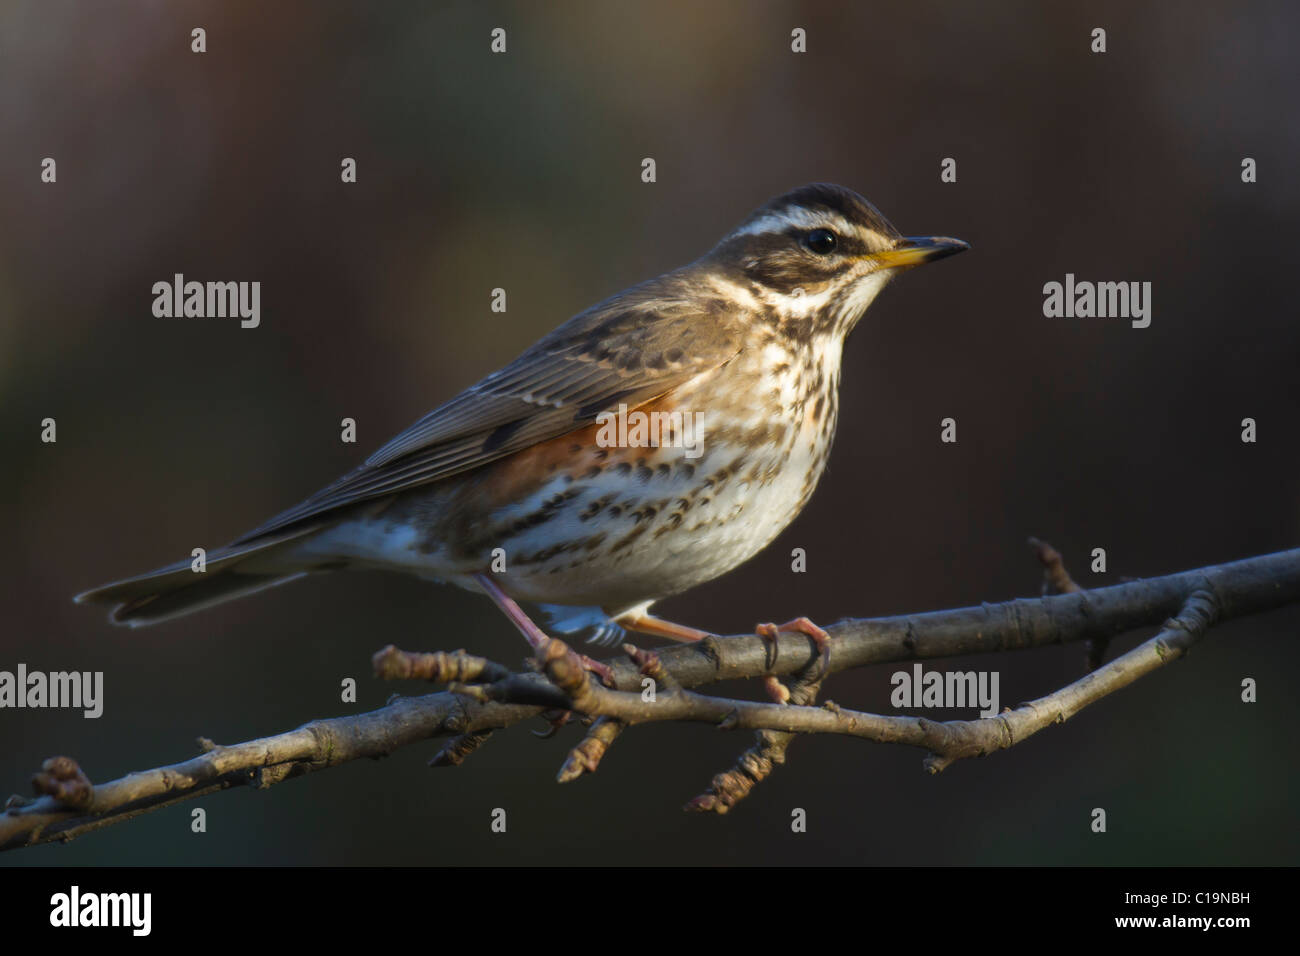 Redwing (Turdus iliacus) perched on a branch Stock Photo